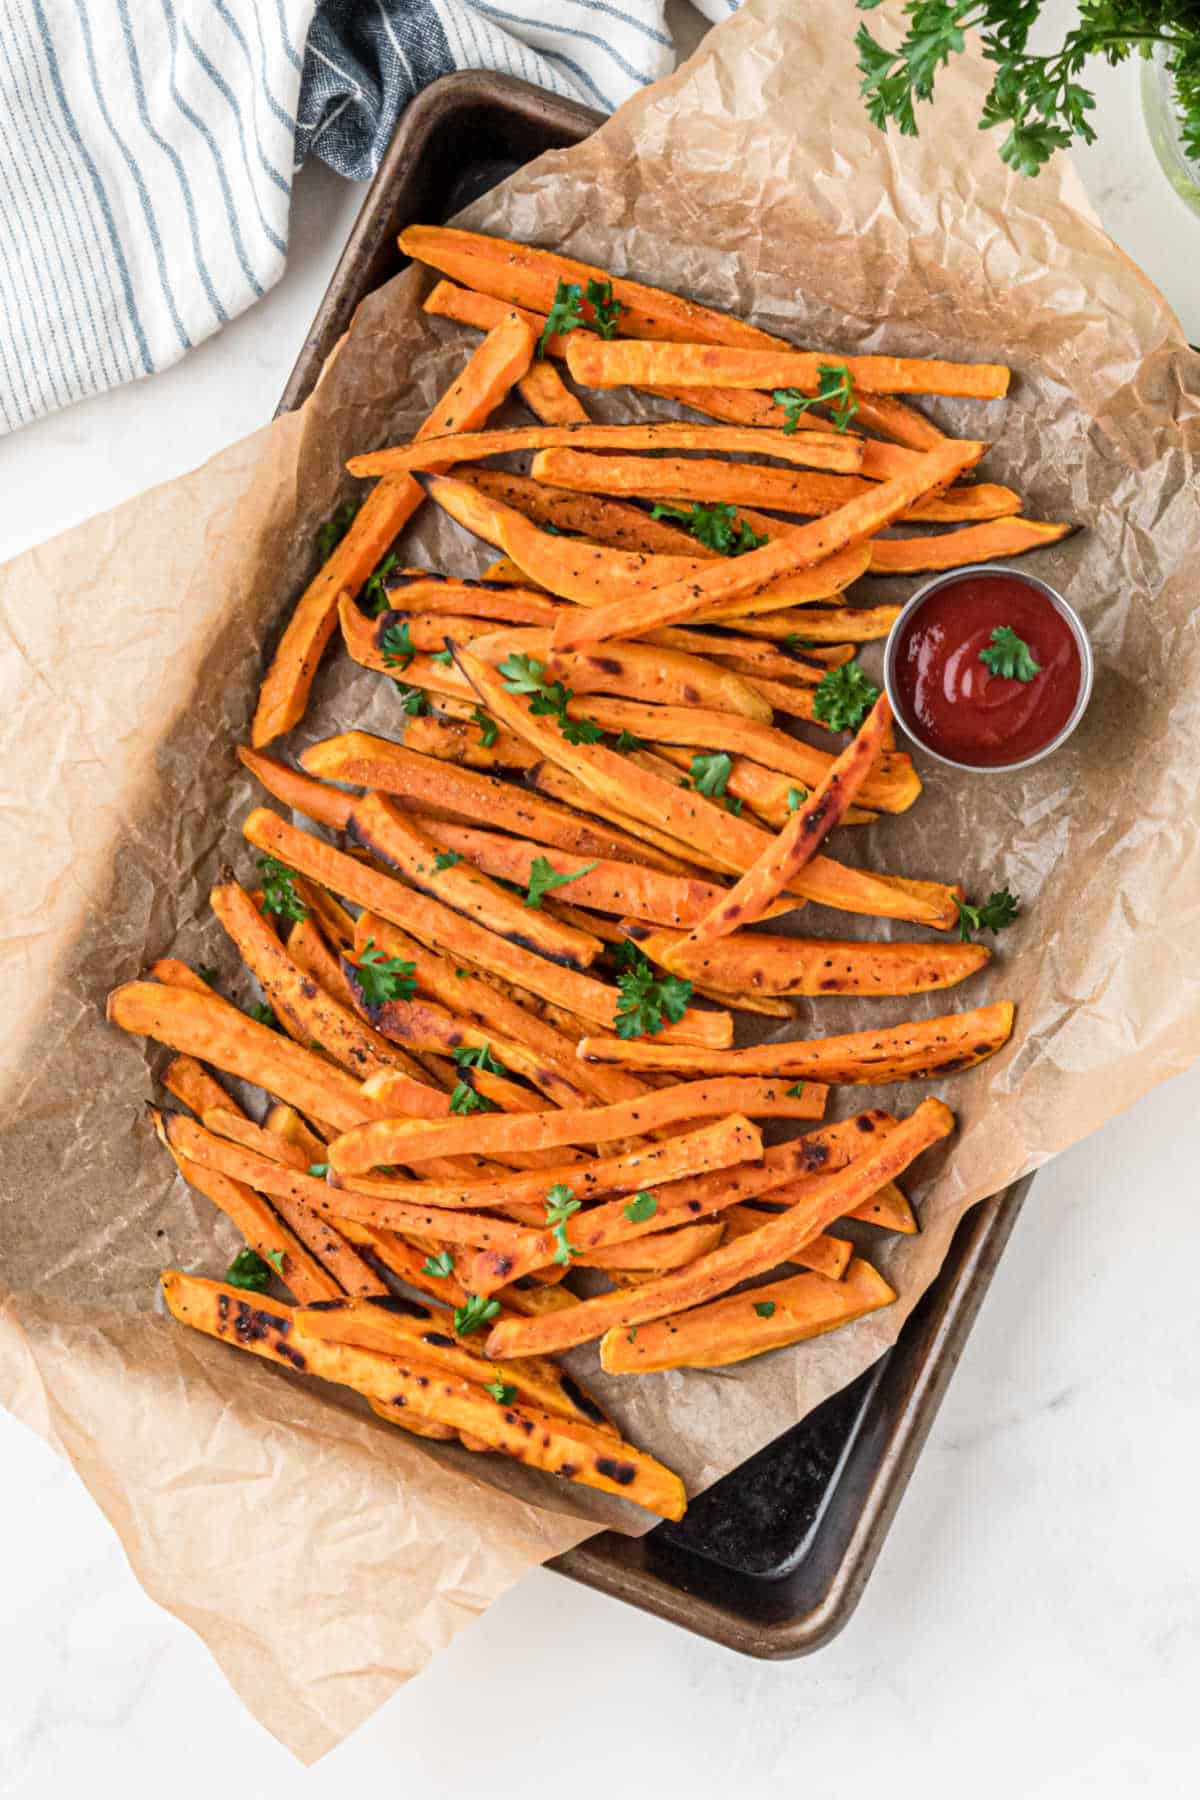 Sweet potato fries on a baking tray from overhead.